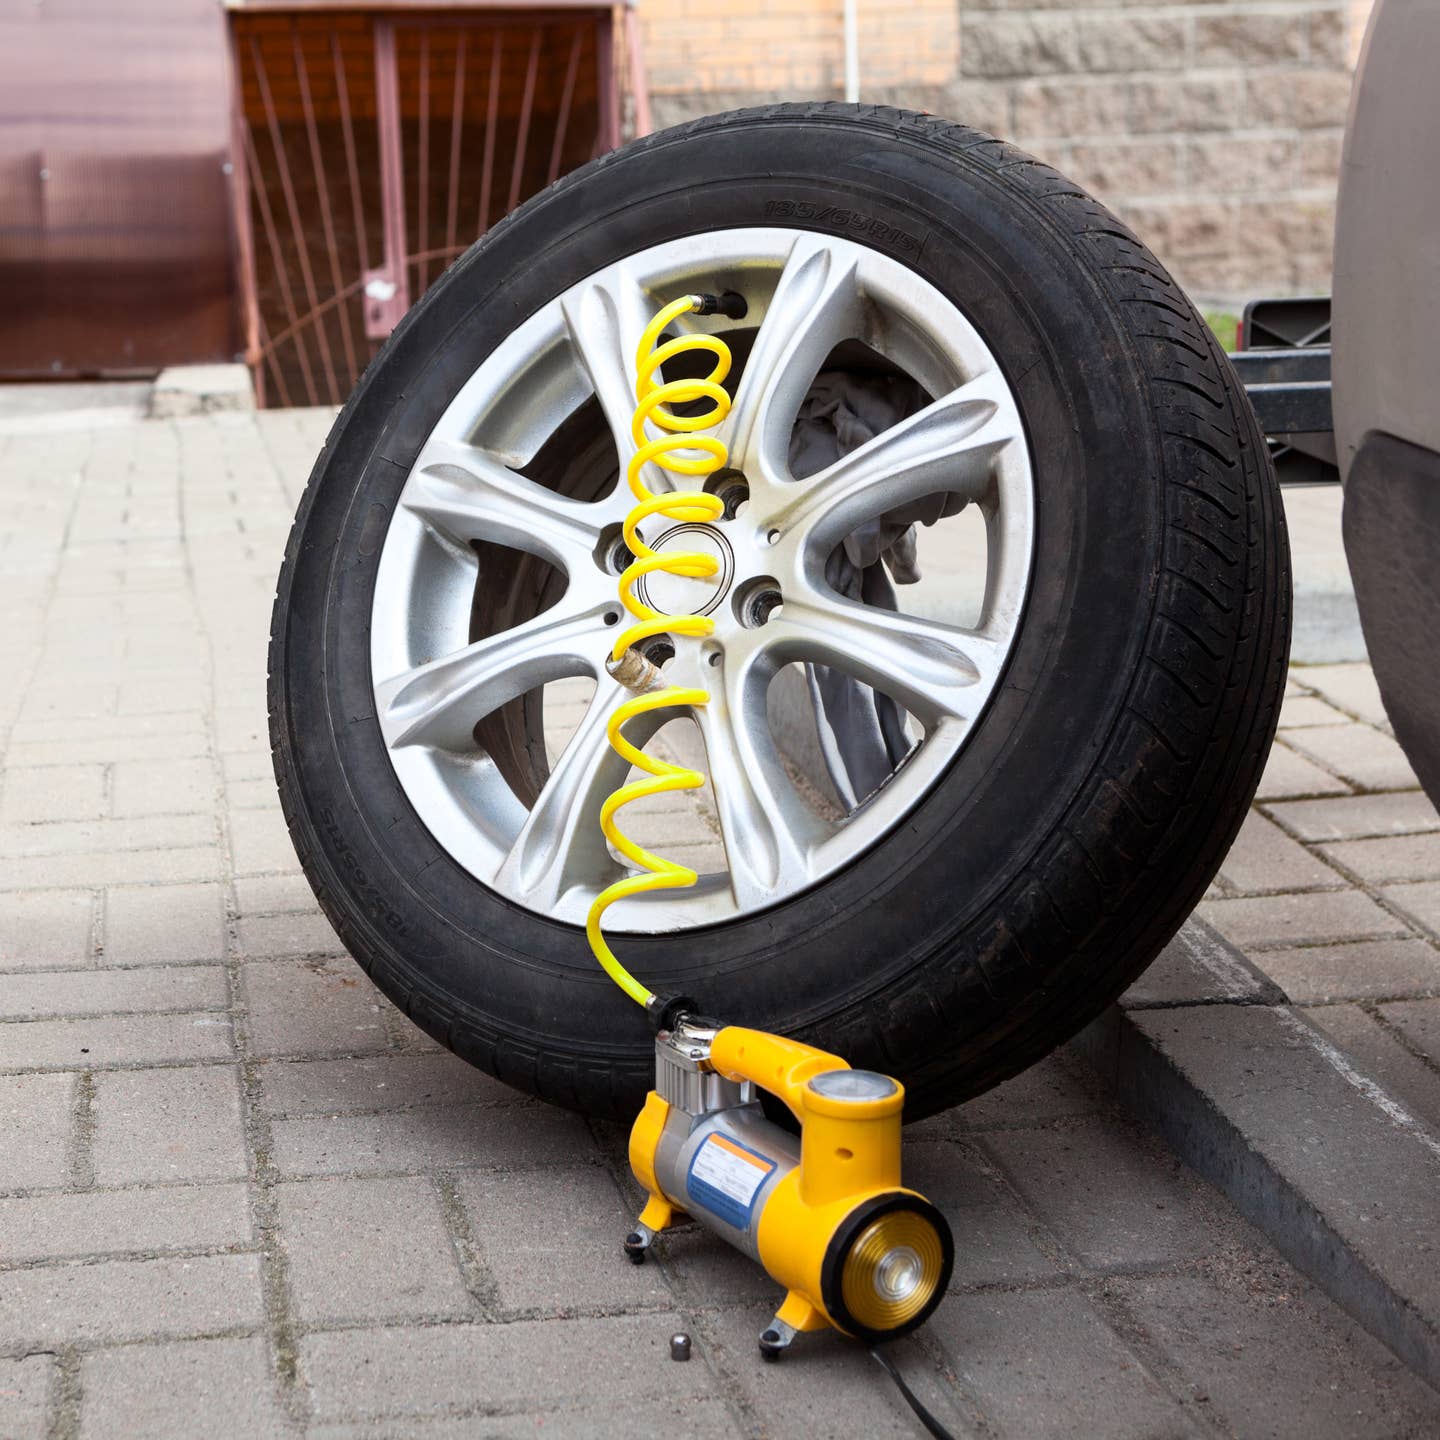 A yellow tire inflator filling a tire off of its vehicle.